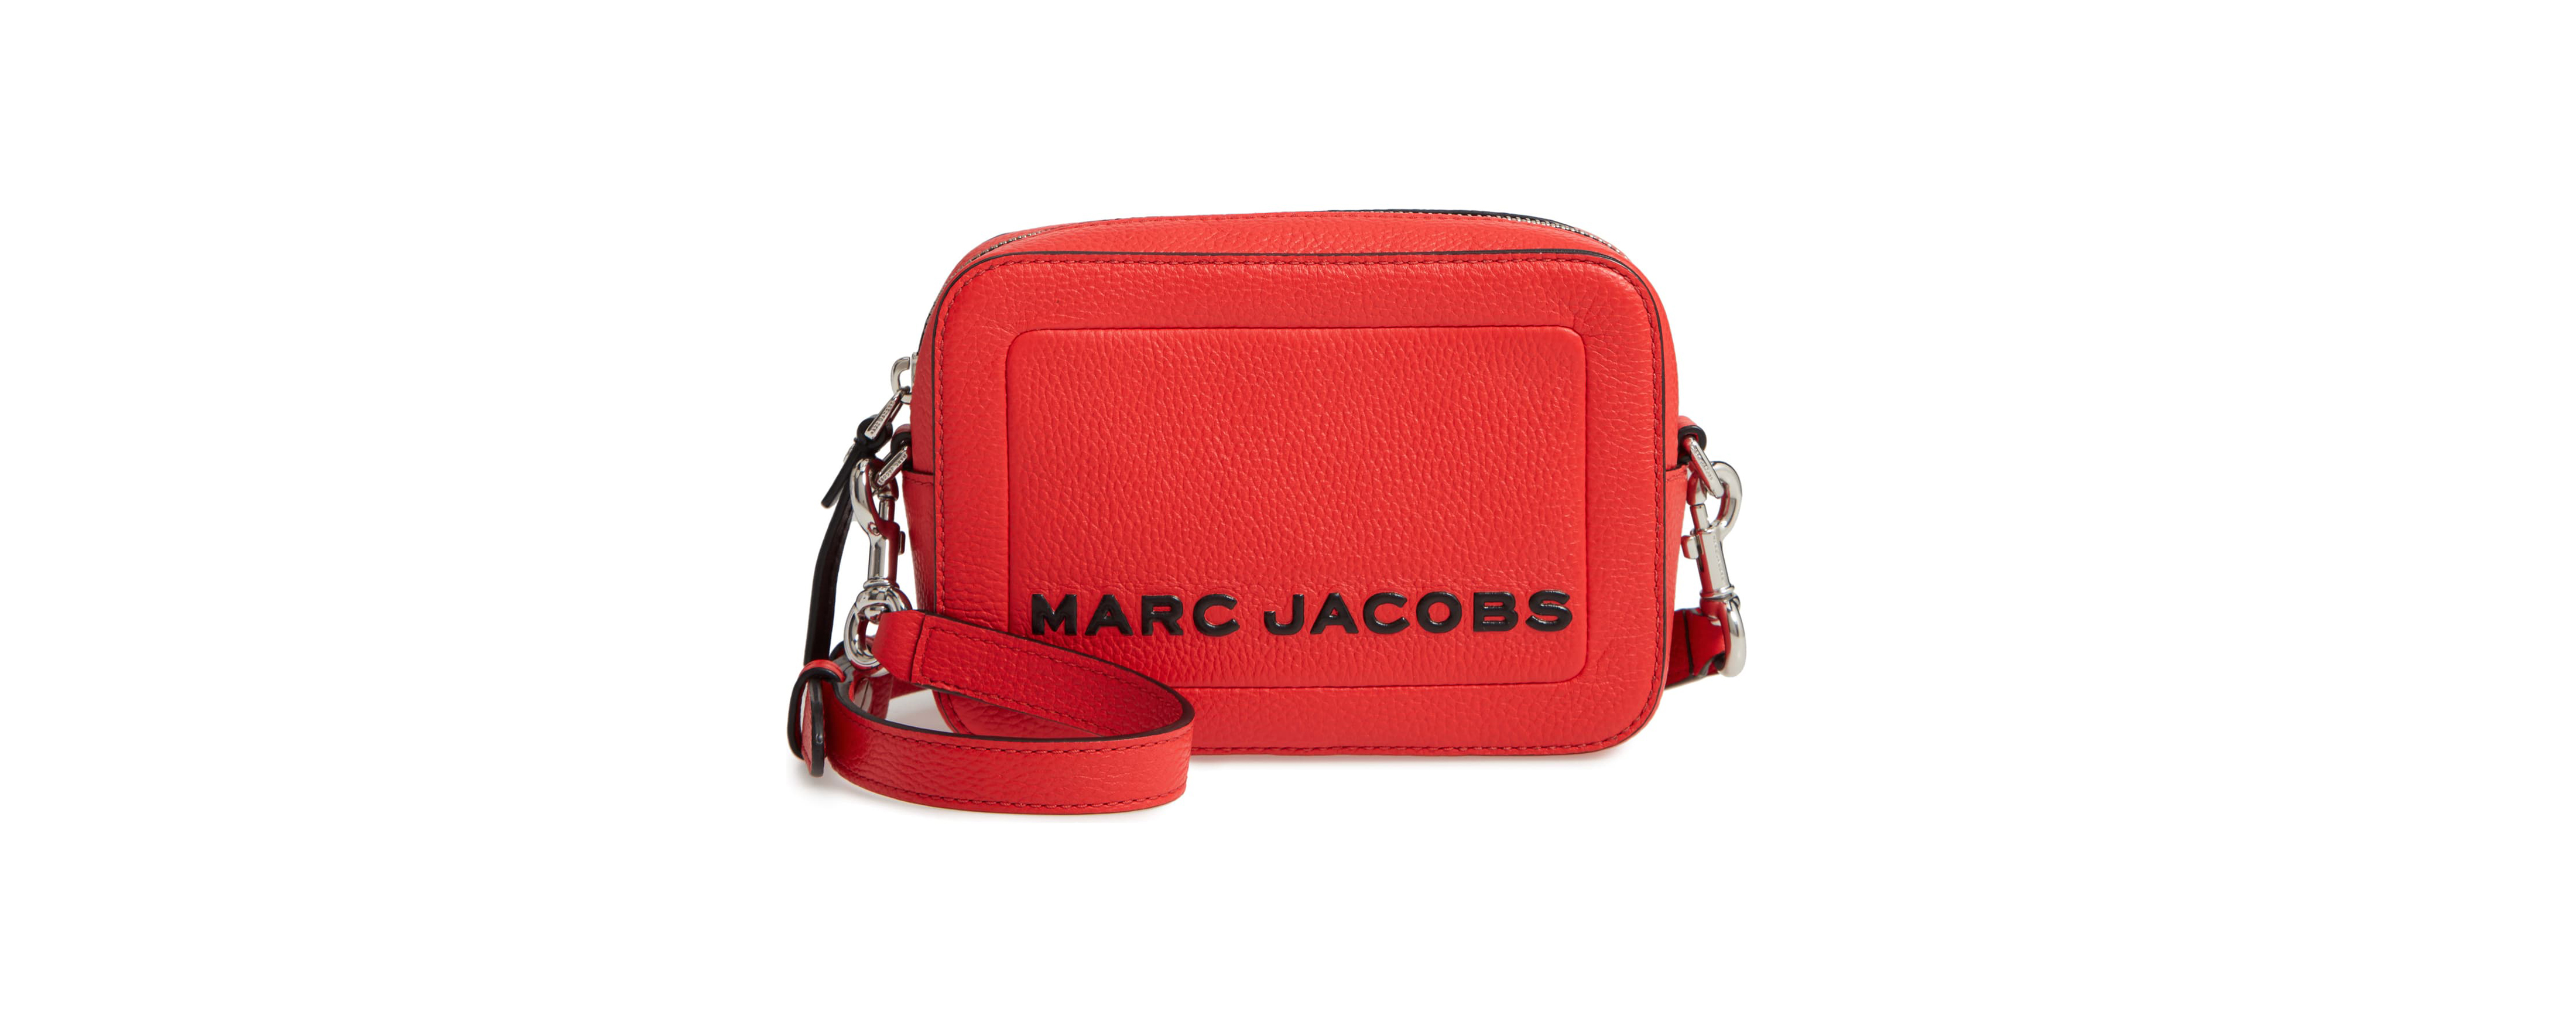 Marc by marc jacobs crossbody bag + FREE SHIPPING